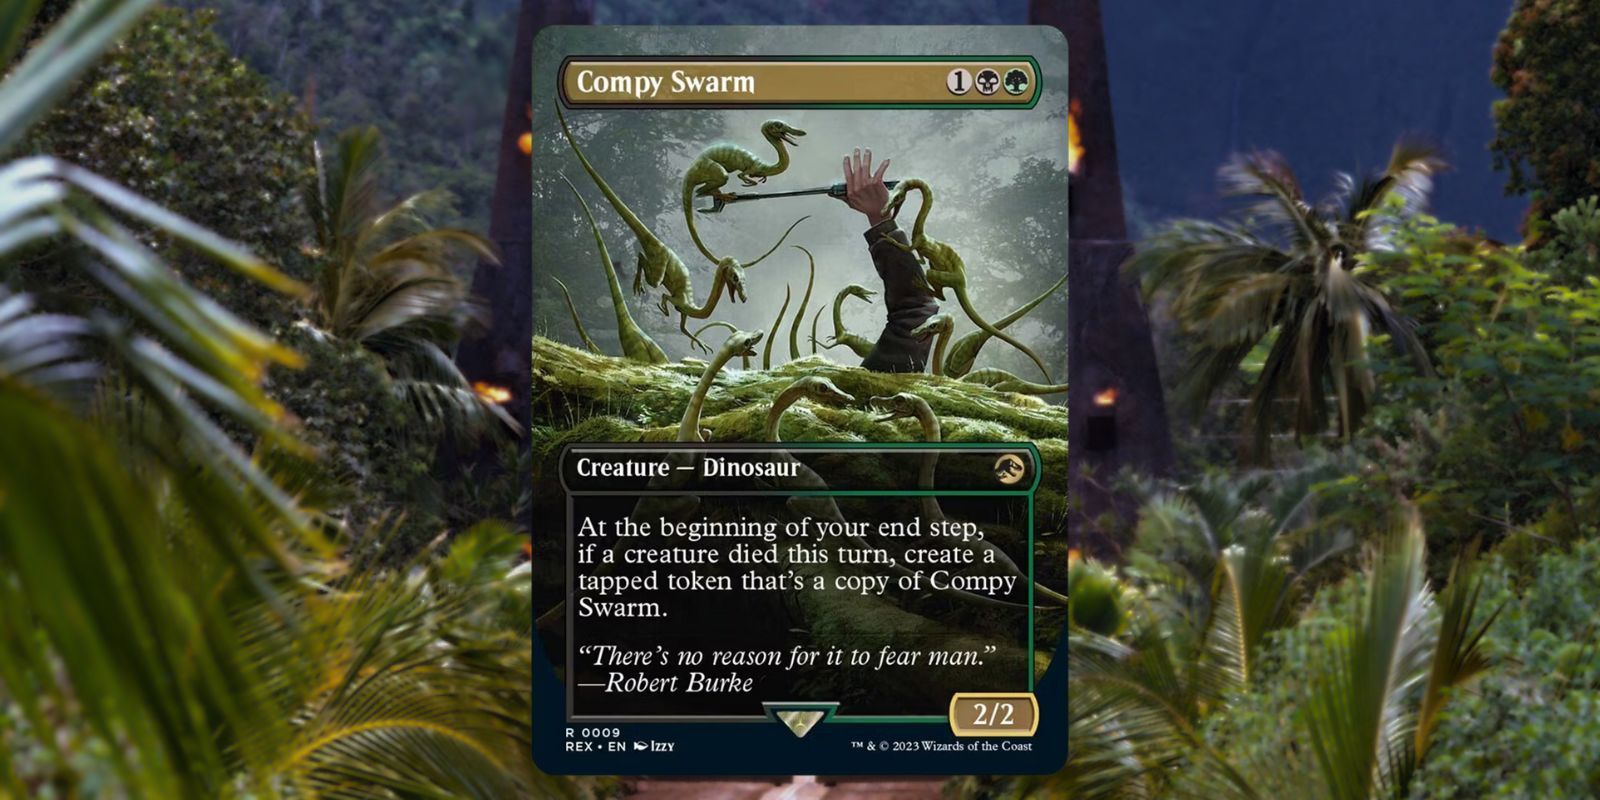 10 Coolest Magic: The Gathering Cards From The Jurassic World Crossover